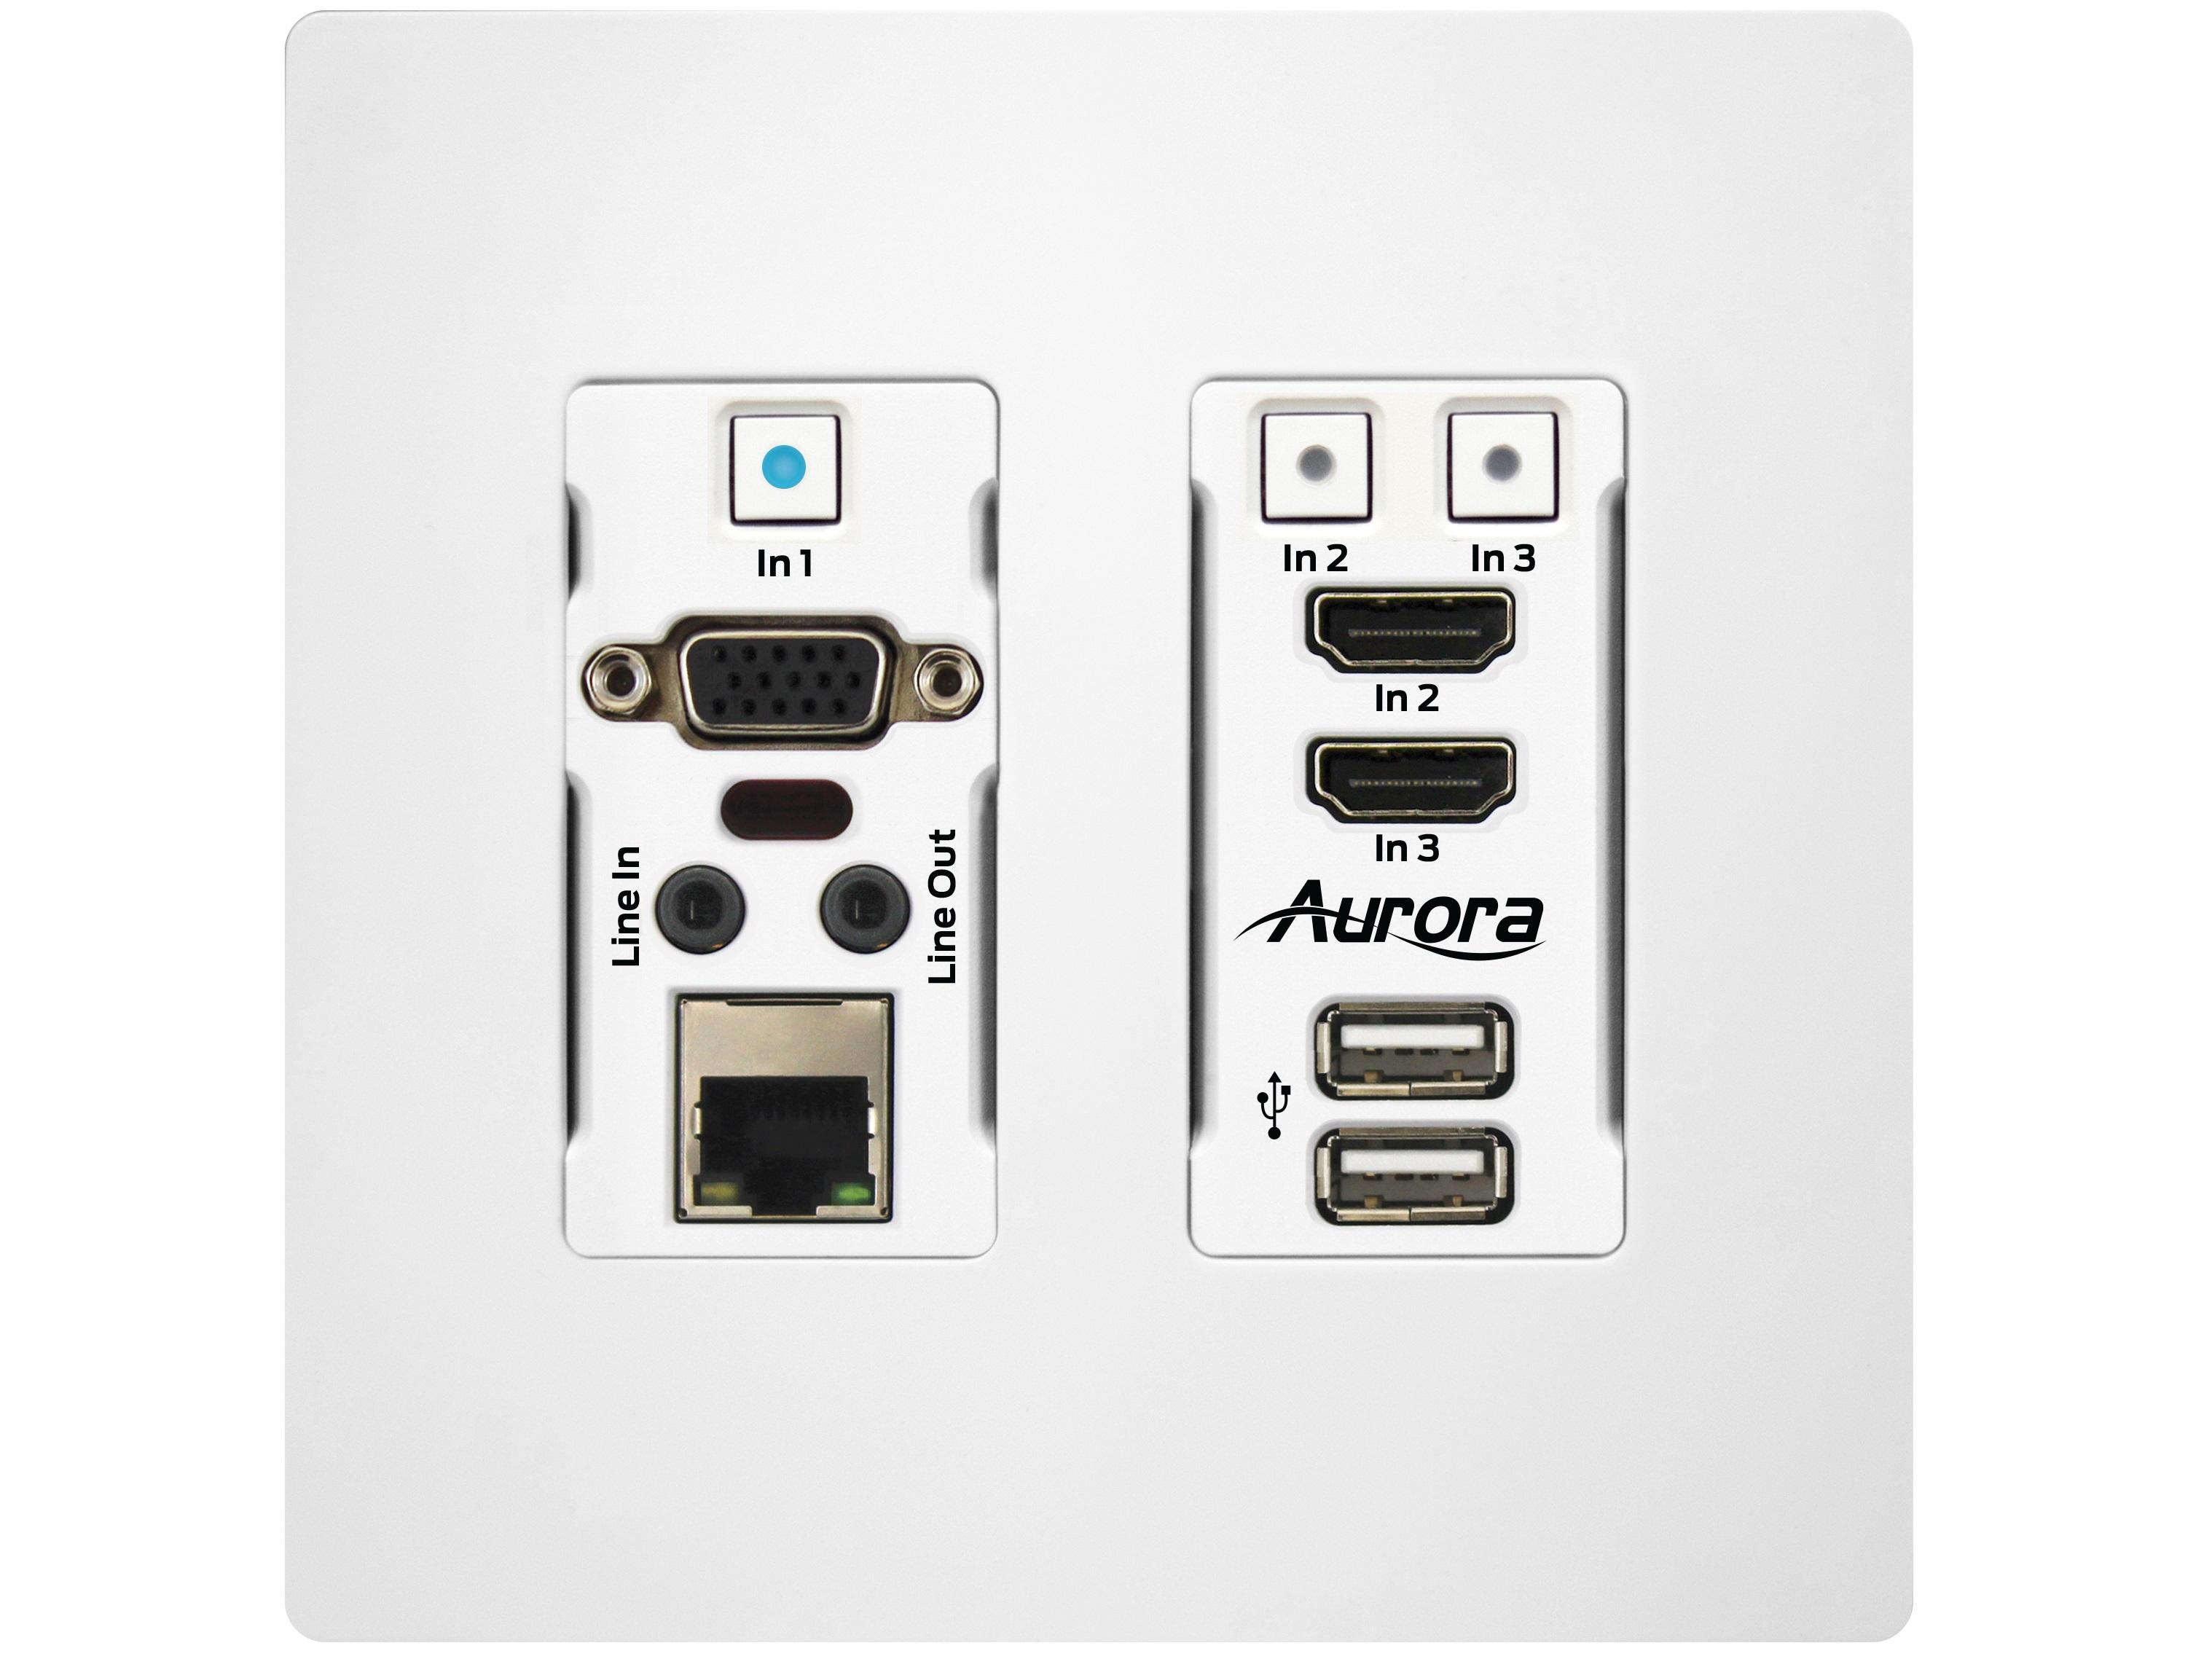 HTW-2-W 4K60 HDR 1xVGA/2xHDMI input HDBaseT 2.0 Wall Plate Extender (Transmitter) up to 100m/330ft (White) by Aurora Multimedia